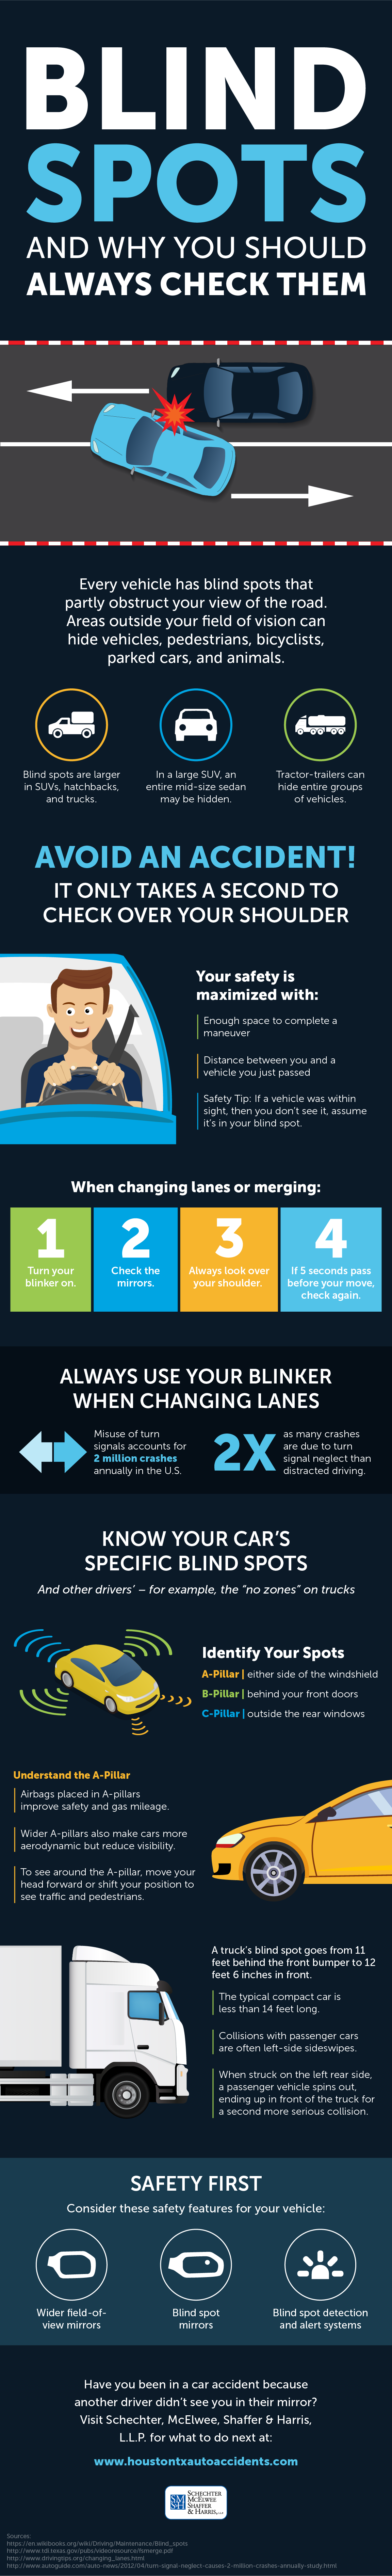 Blind Spots Infographic